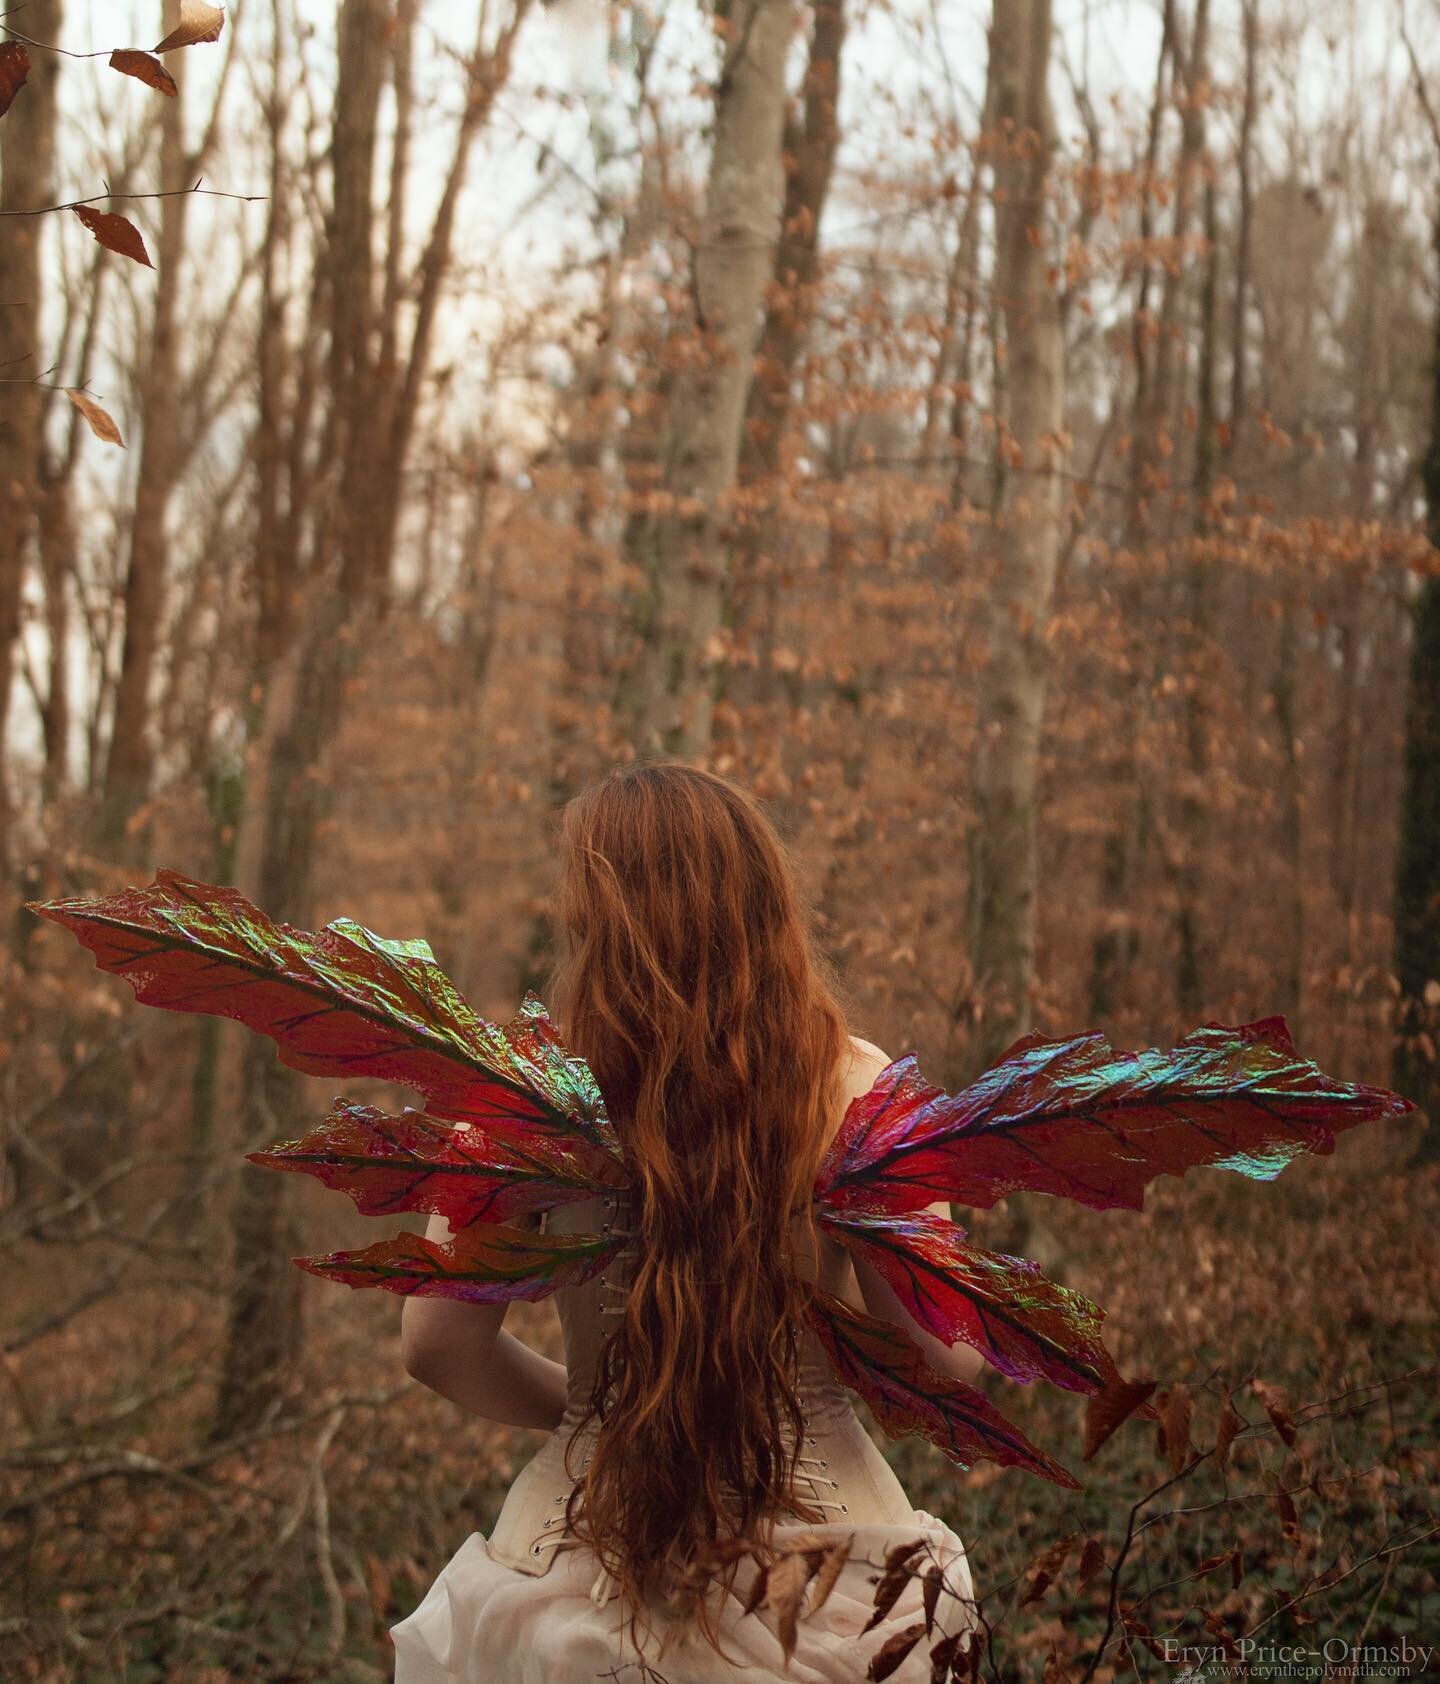 Took these custom maple leaf faerie wings out for a quick flutter about while waiting for their local pickup. Love crafting customised designs so everyone can be their perfect dream unique fae. DM to plan your own! 
Self-portraits and wings by @silve